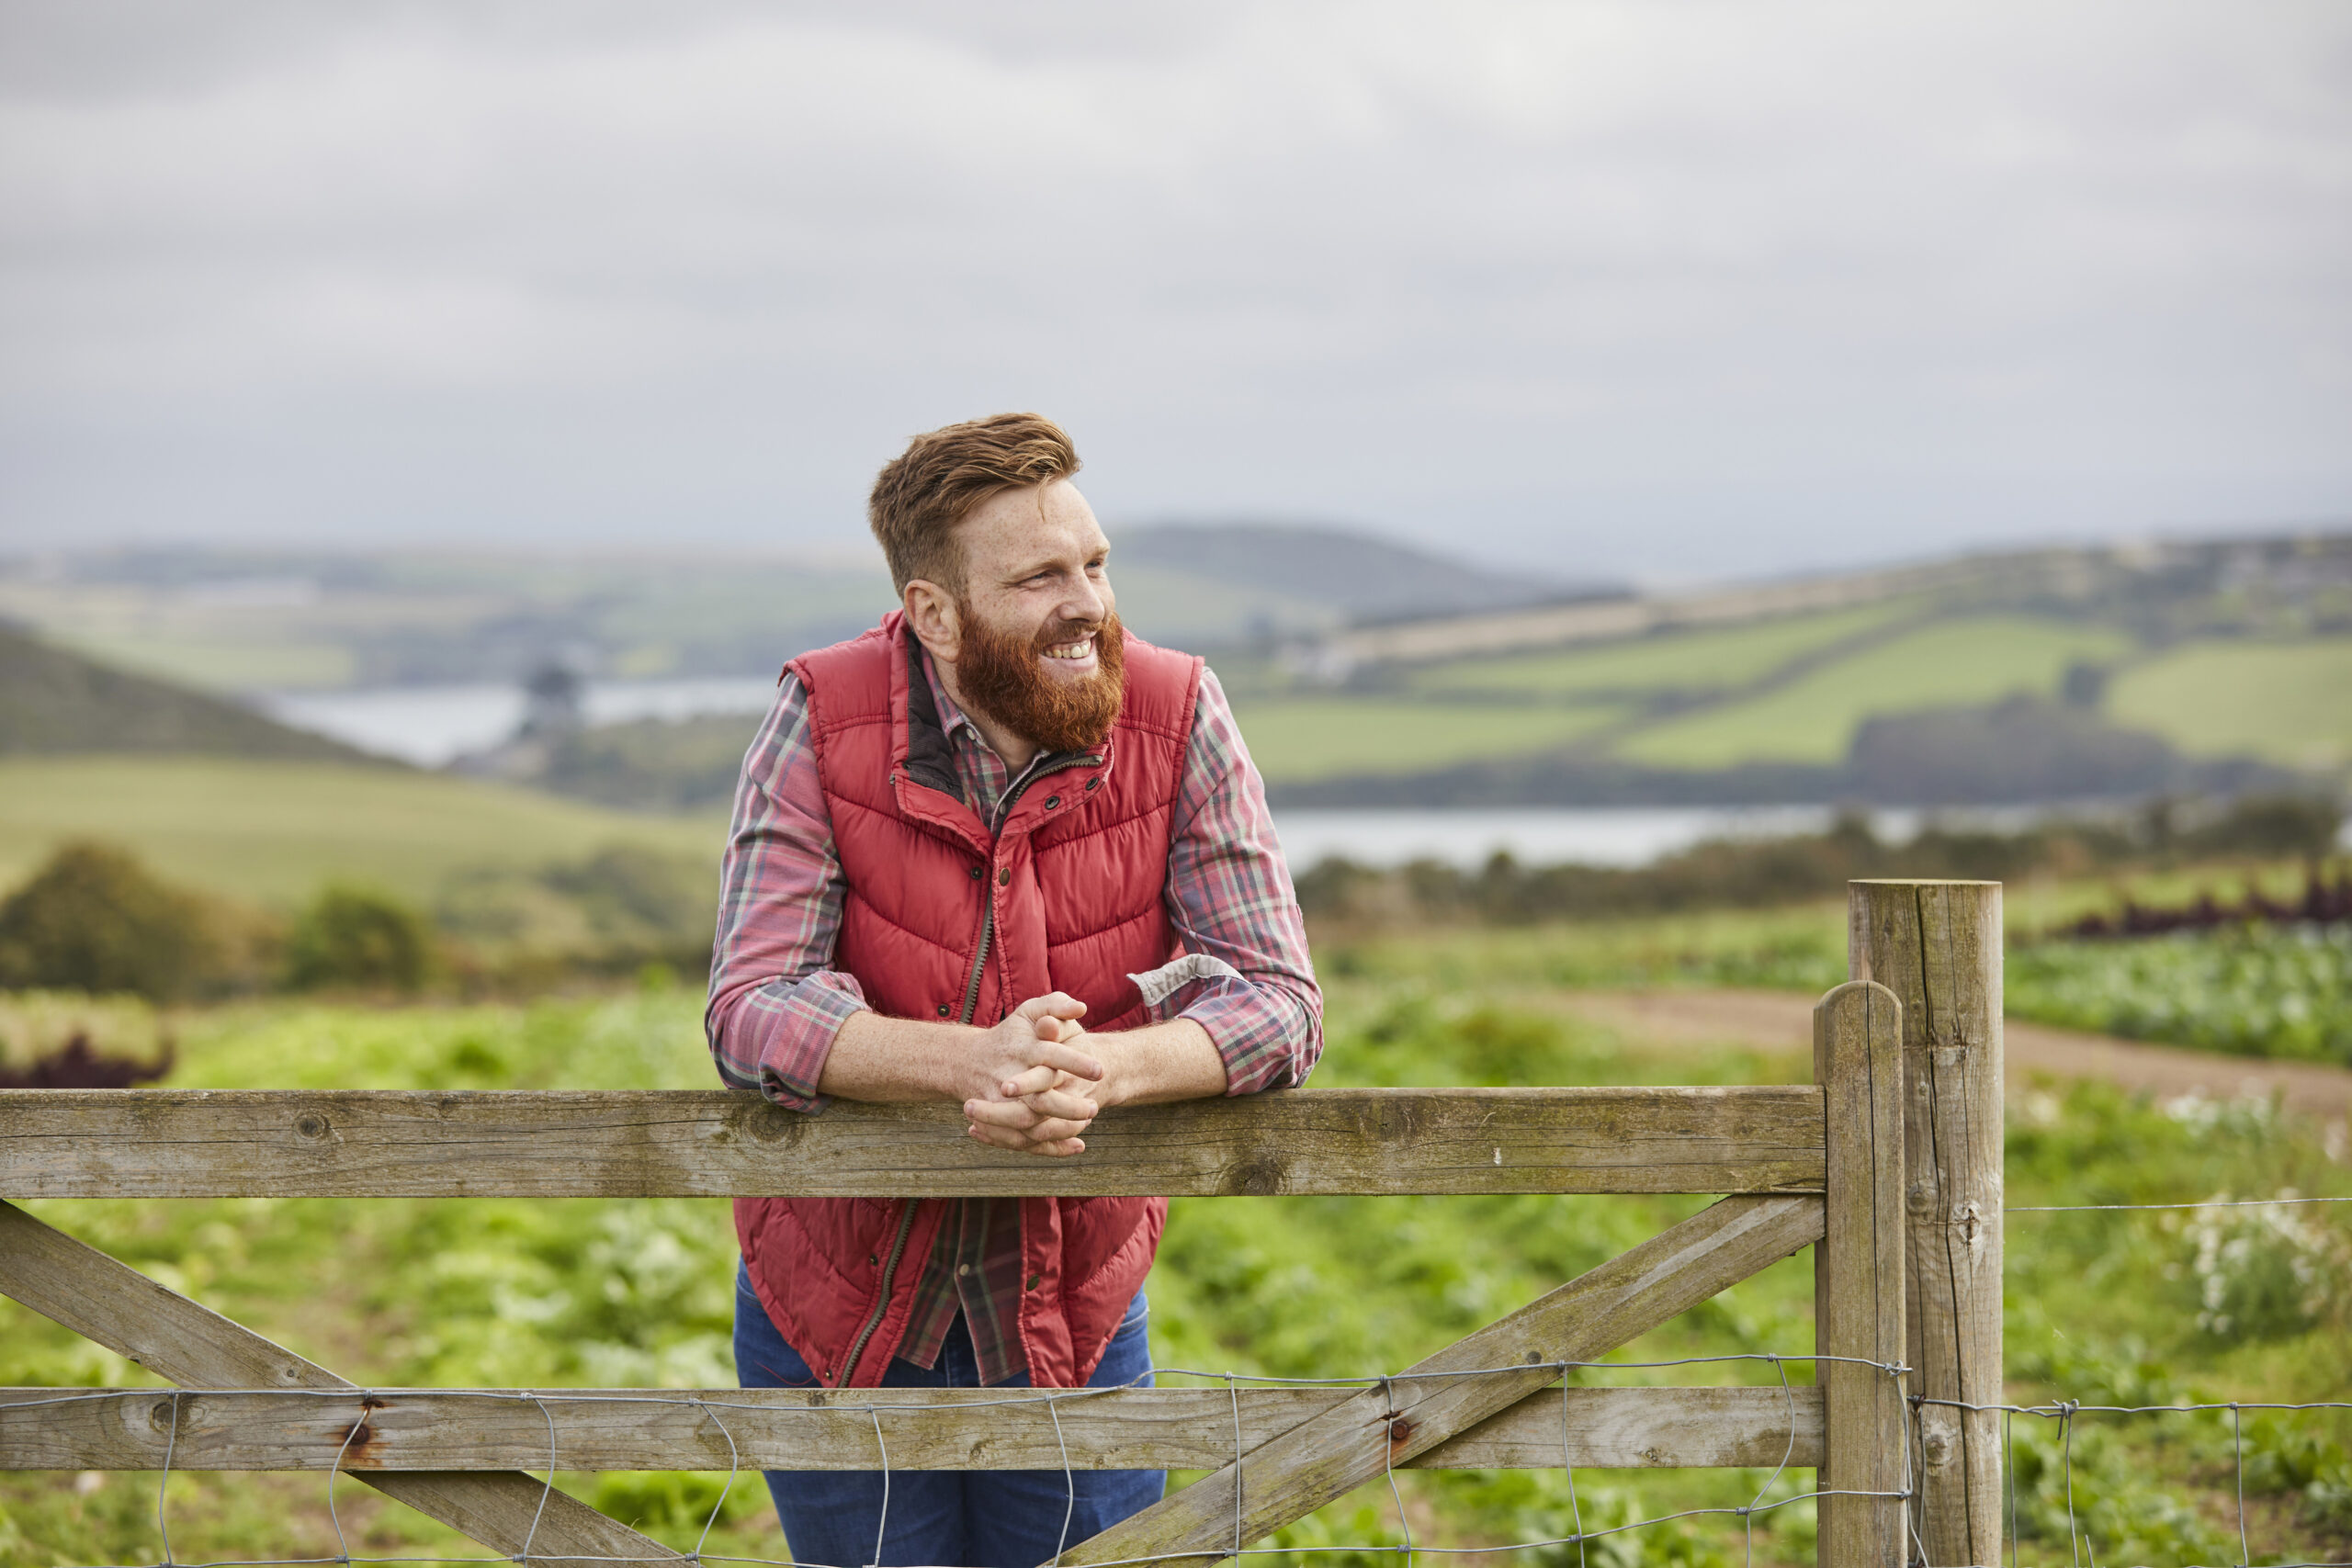 Man on farm leaning against gate looking away